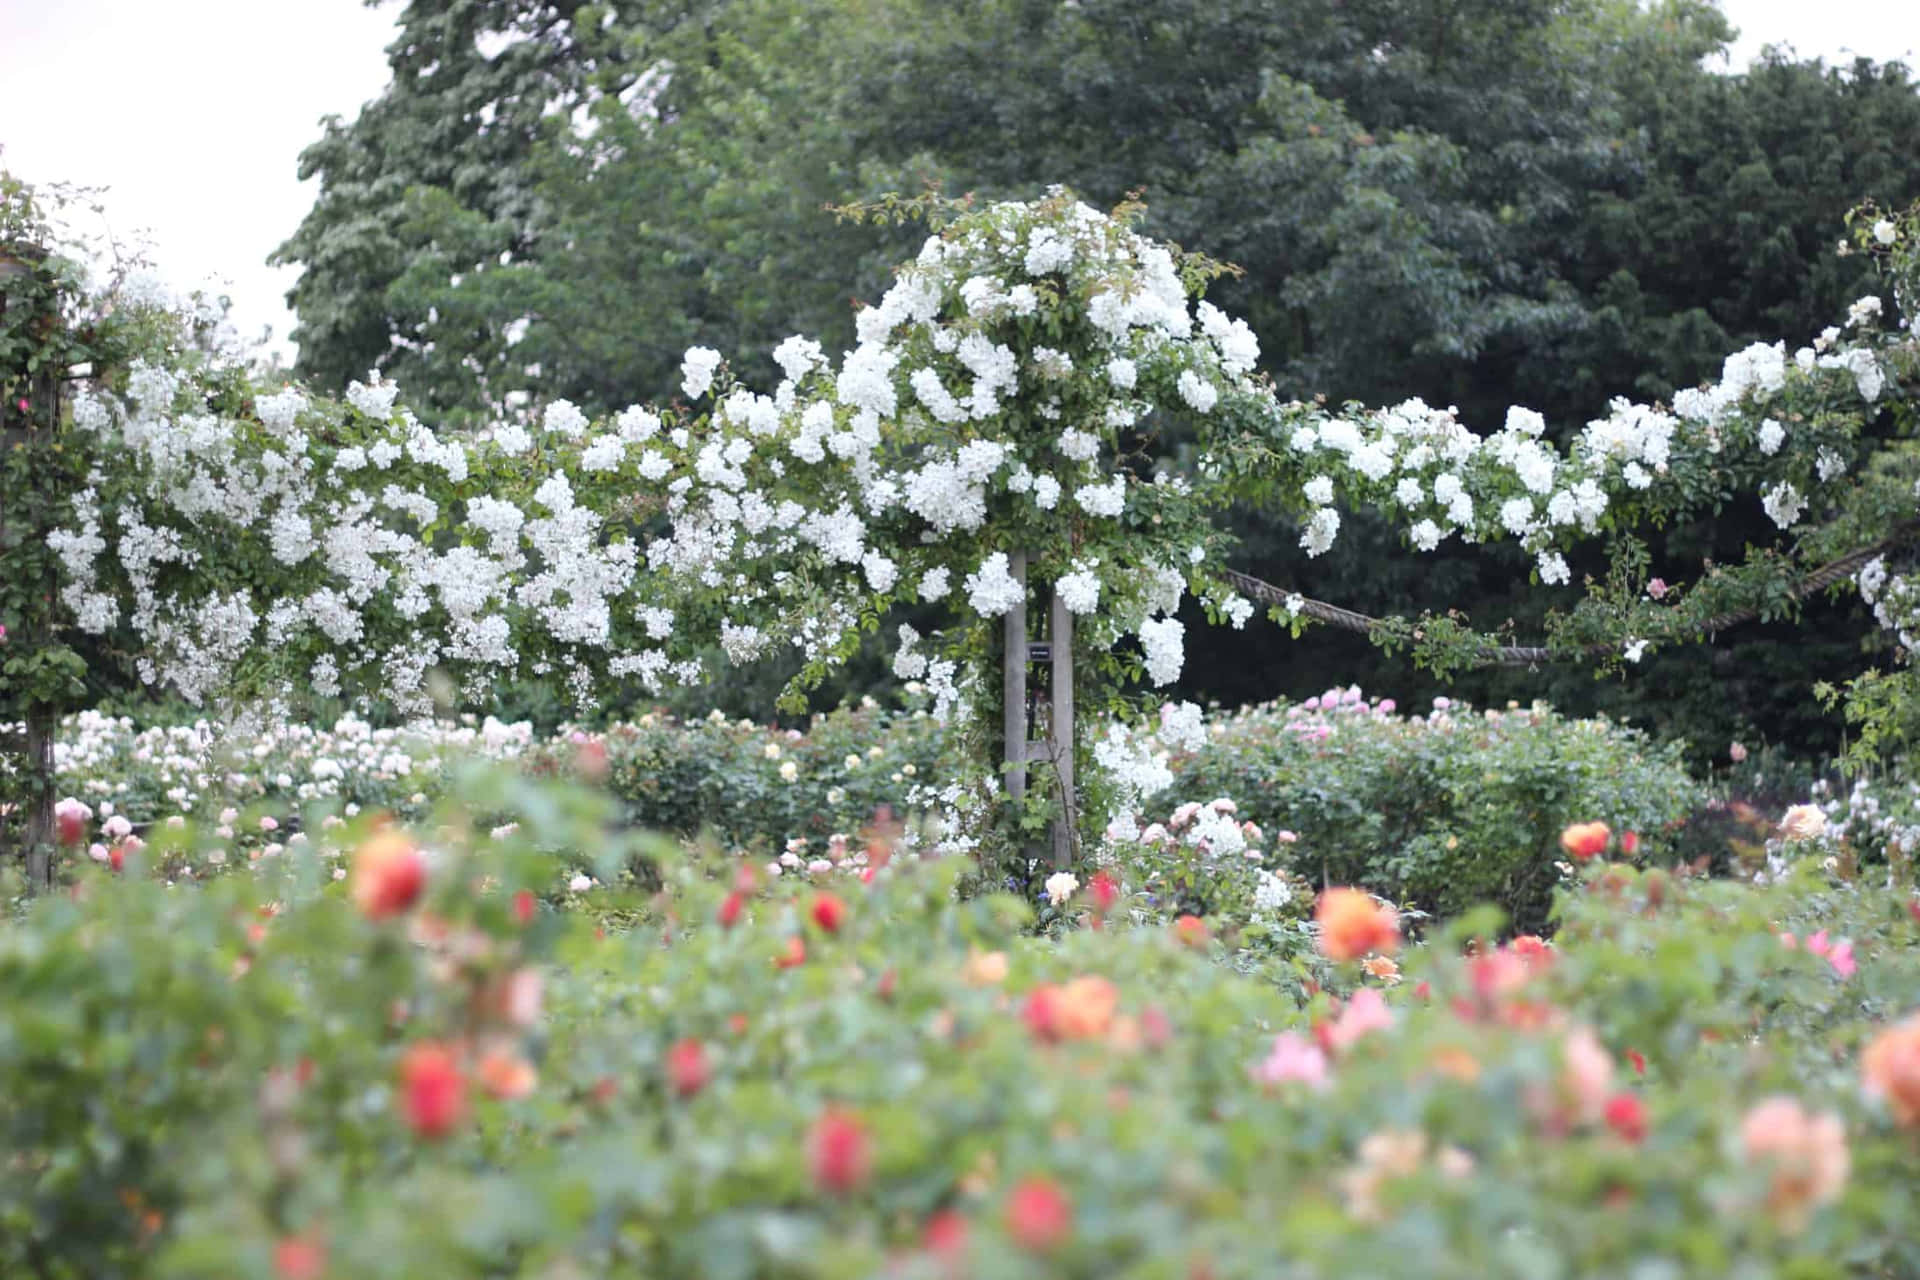 Enjoy the beauty of roses in a relaxing garden.